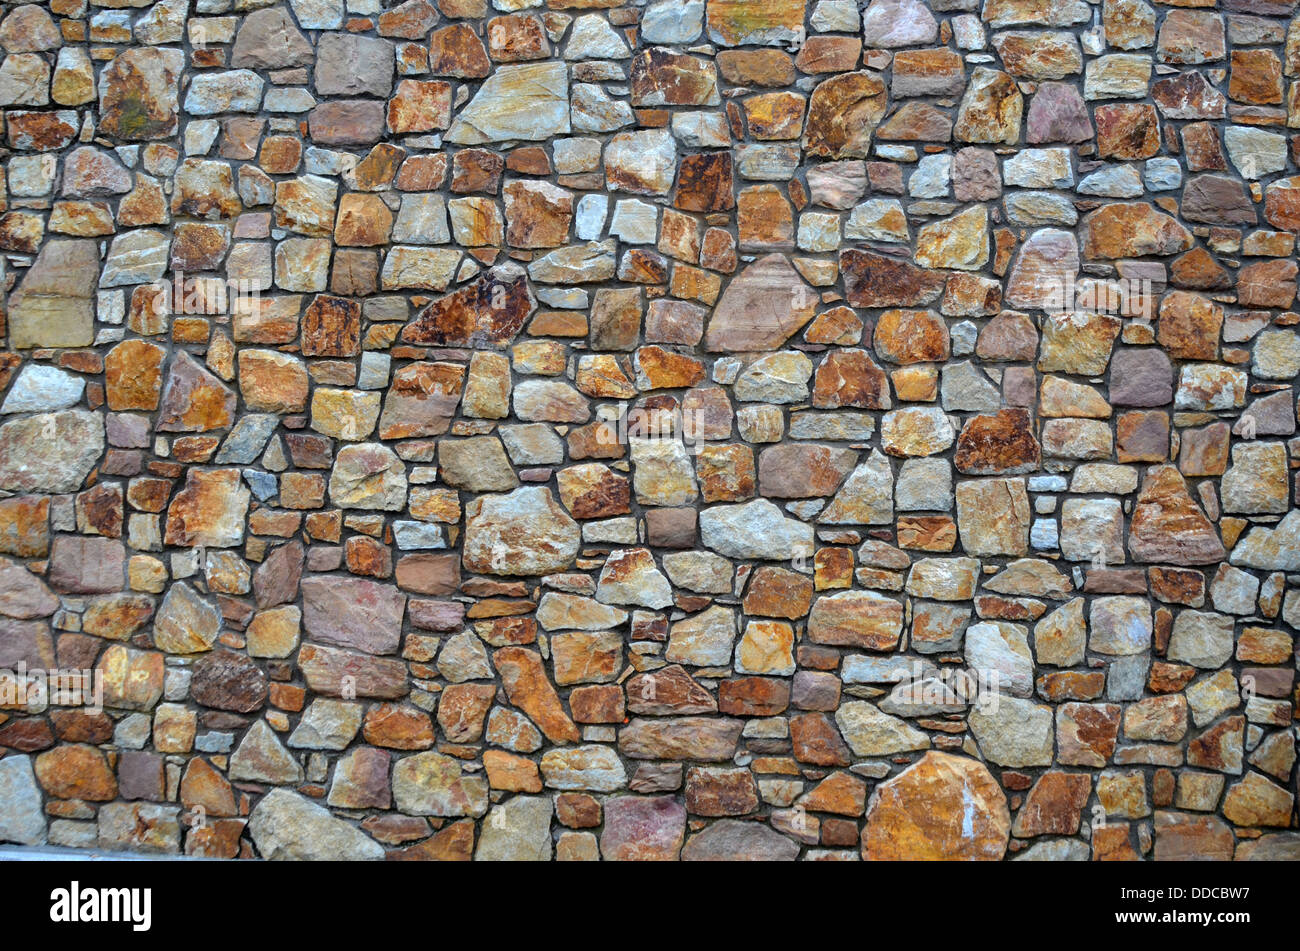 stone wall of natural stones Stock Photo